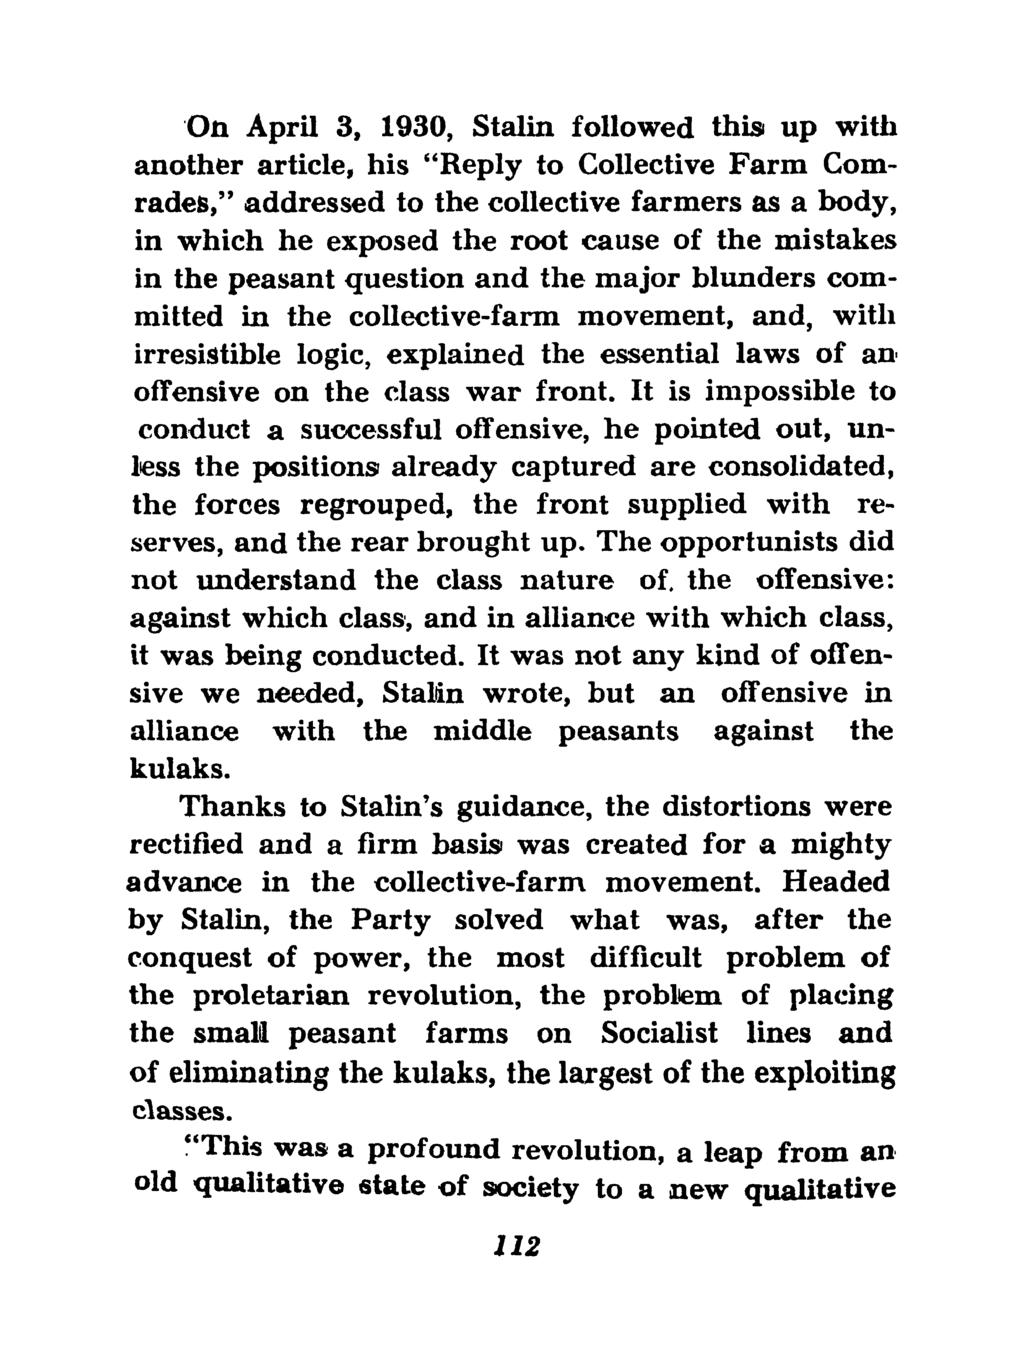 On April 3, 1930, Stalin followed this up with another article, his "Reply to Collective Farm Comrades," addressed to the collective farmers as a body, in which he exposed the root cause of the